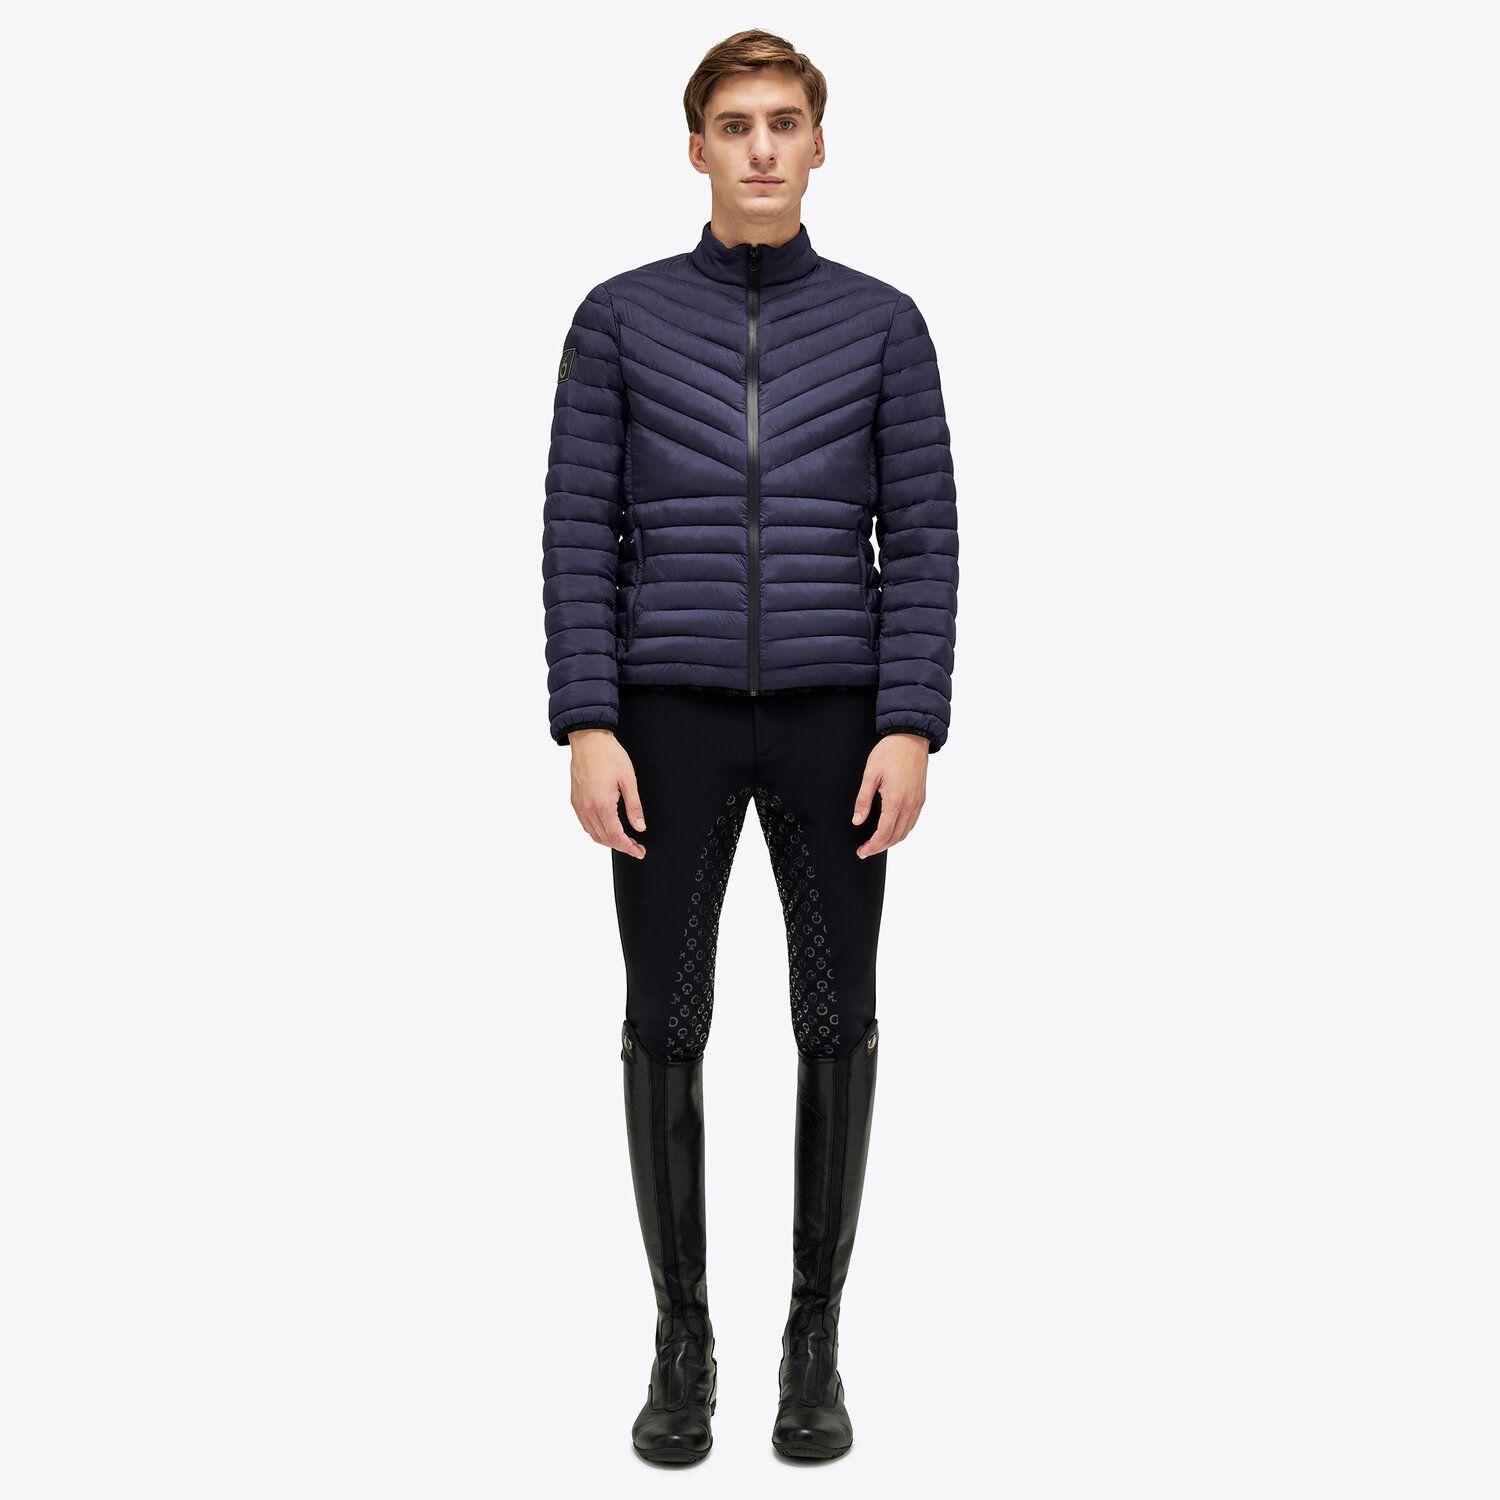 Cavalleria Toscana Men’s puffer jacket in quilted nylon SMOKEY BLUE-1